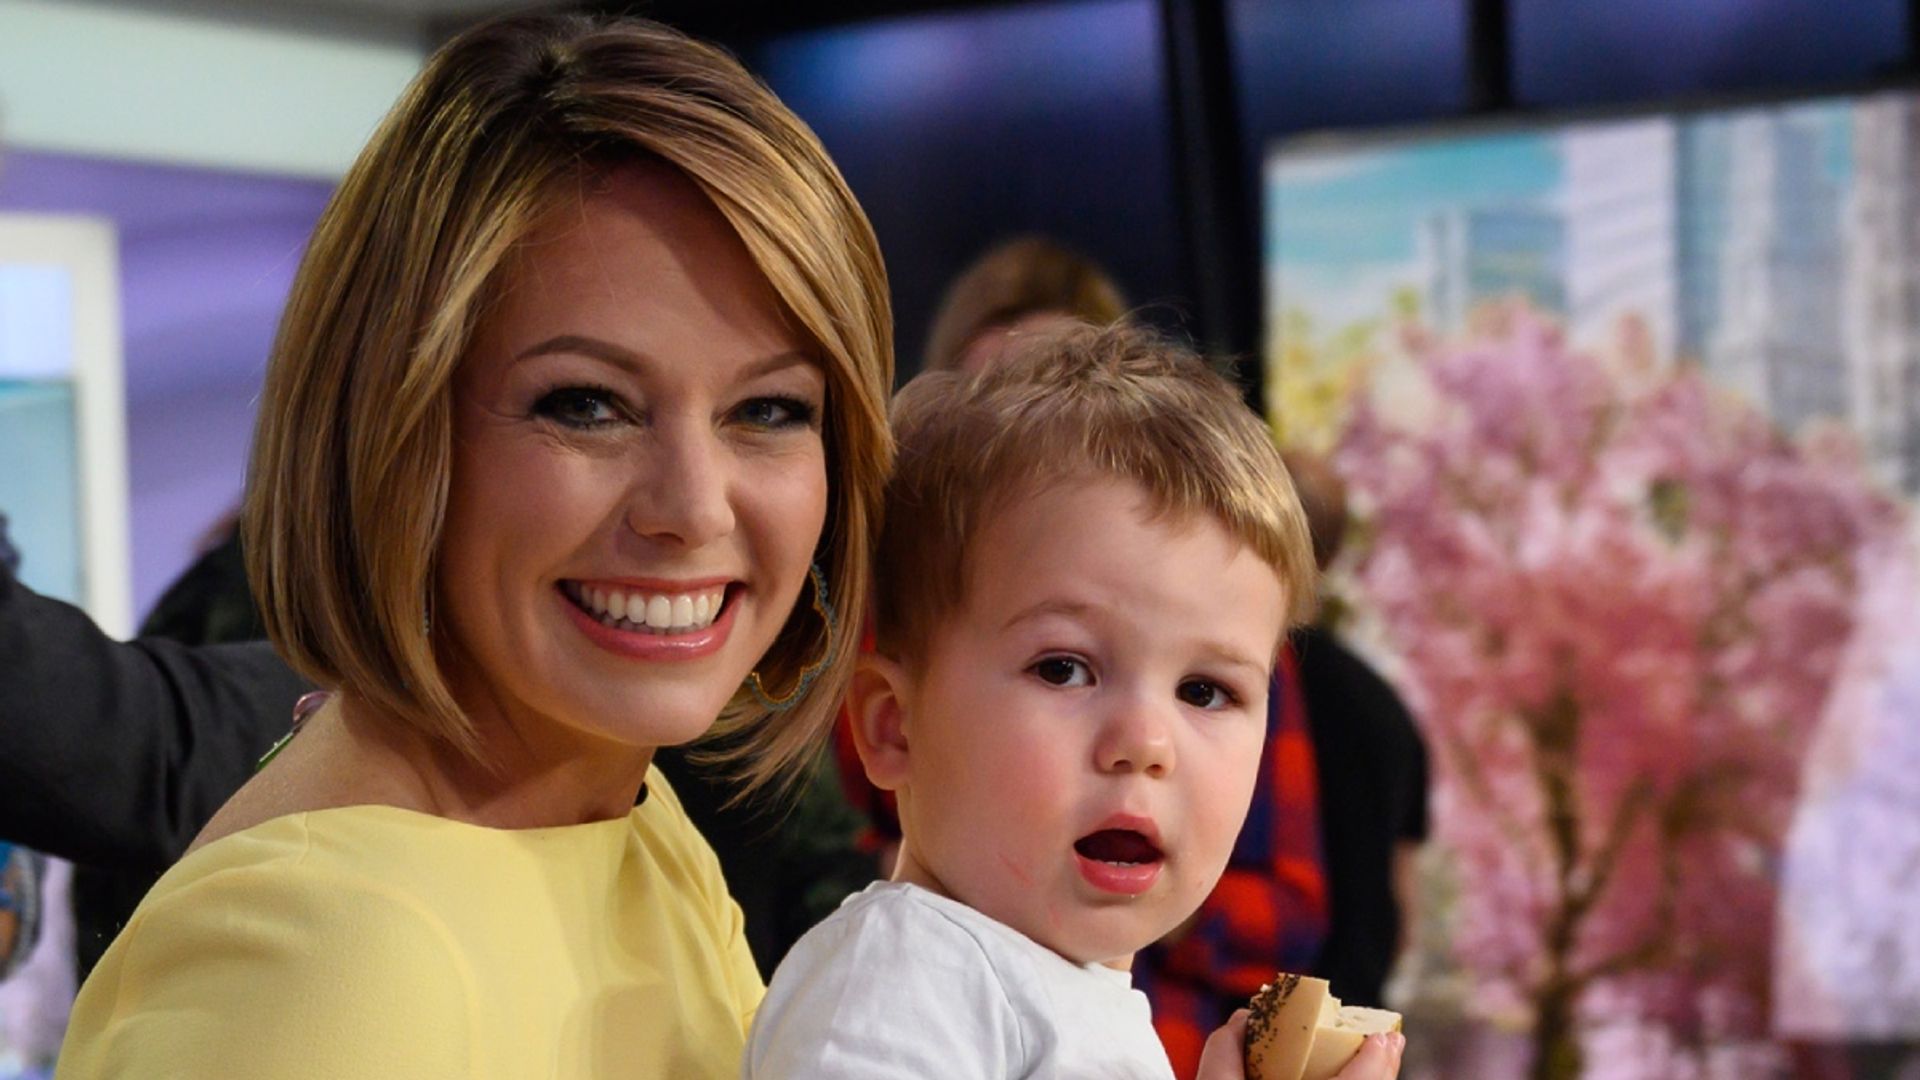 Dylan Dreyer's special family Valentine's Day photo is too adorable for words